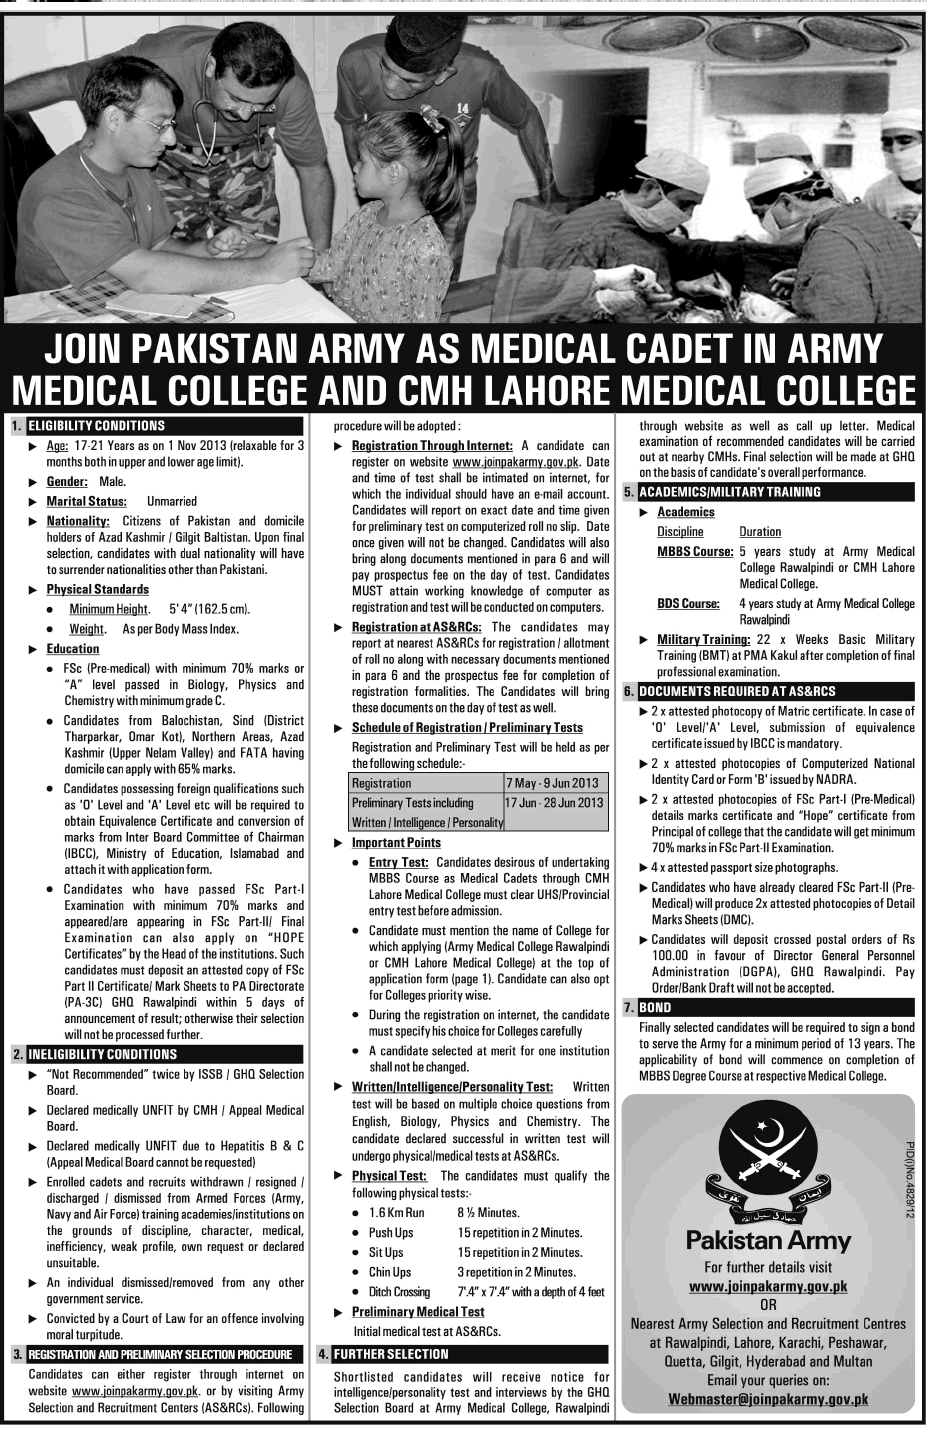 Join Pakistan Army as Medical Cadet 2013-May-05 Online Registration Through Internet